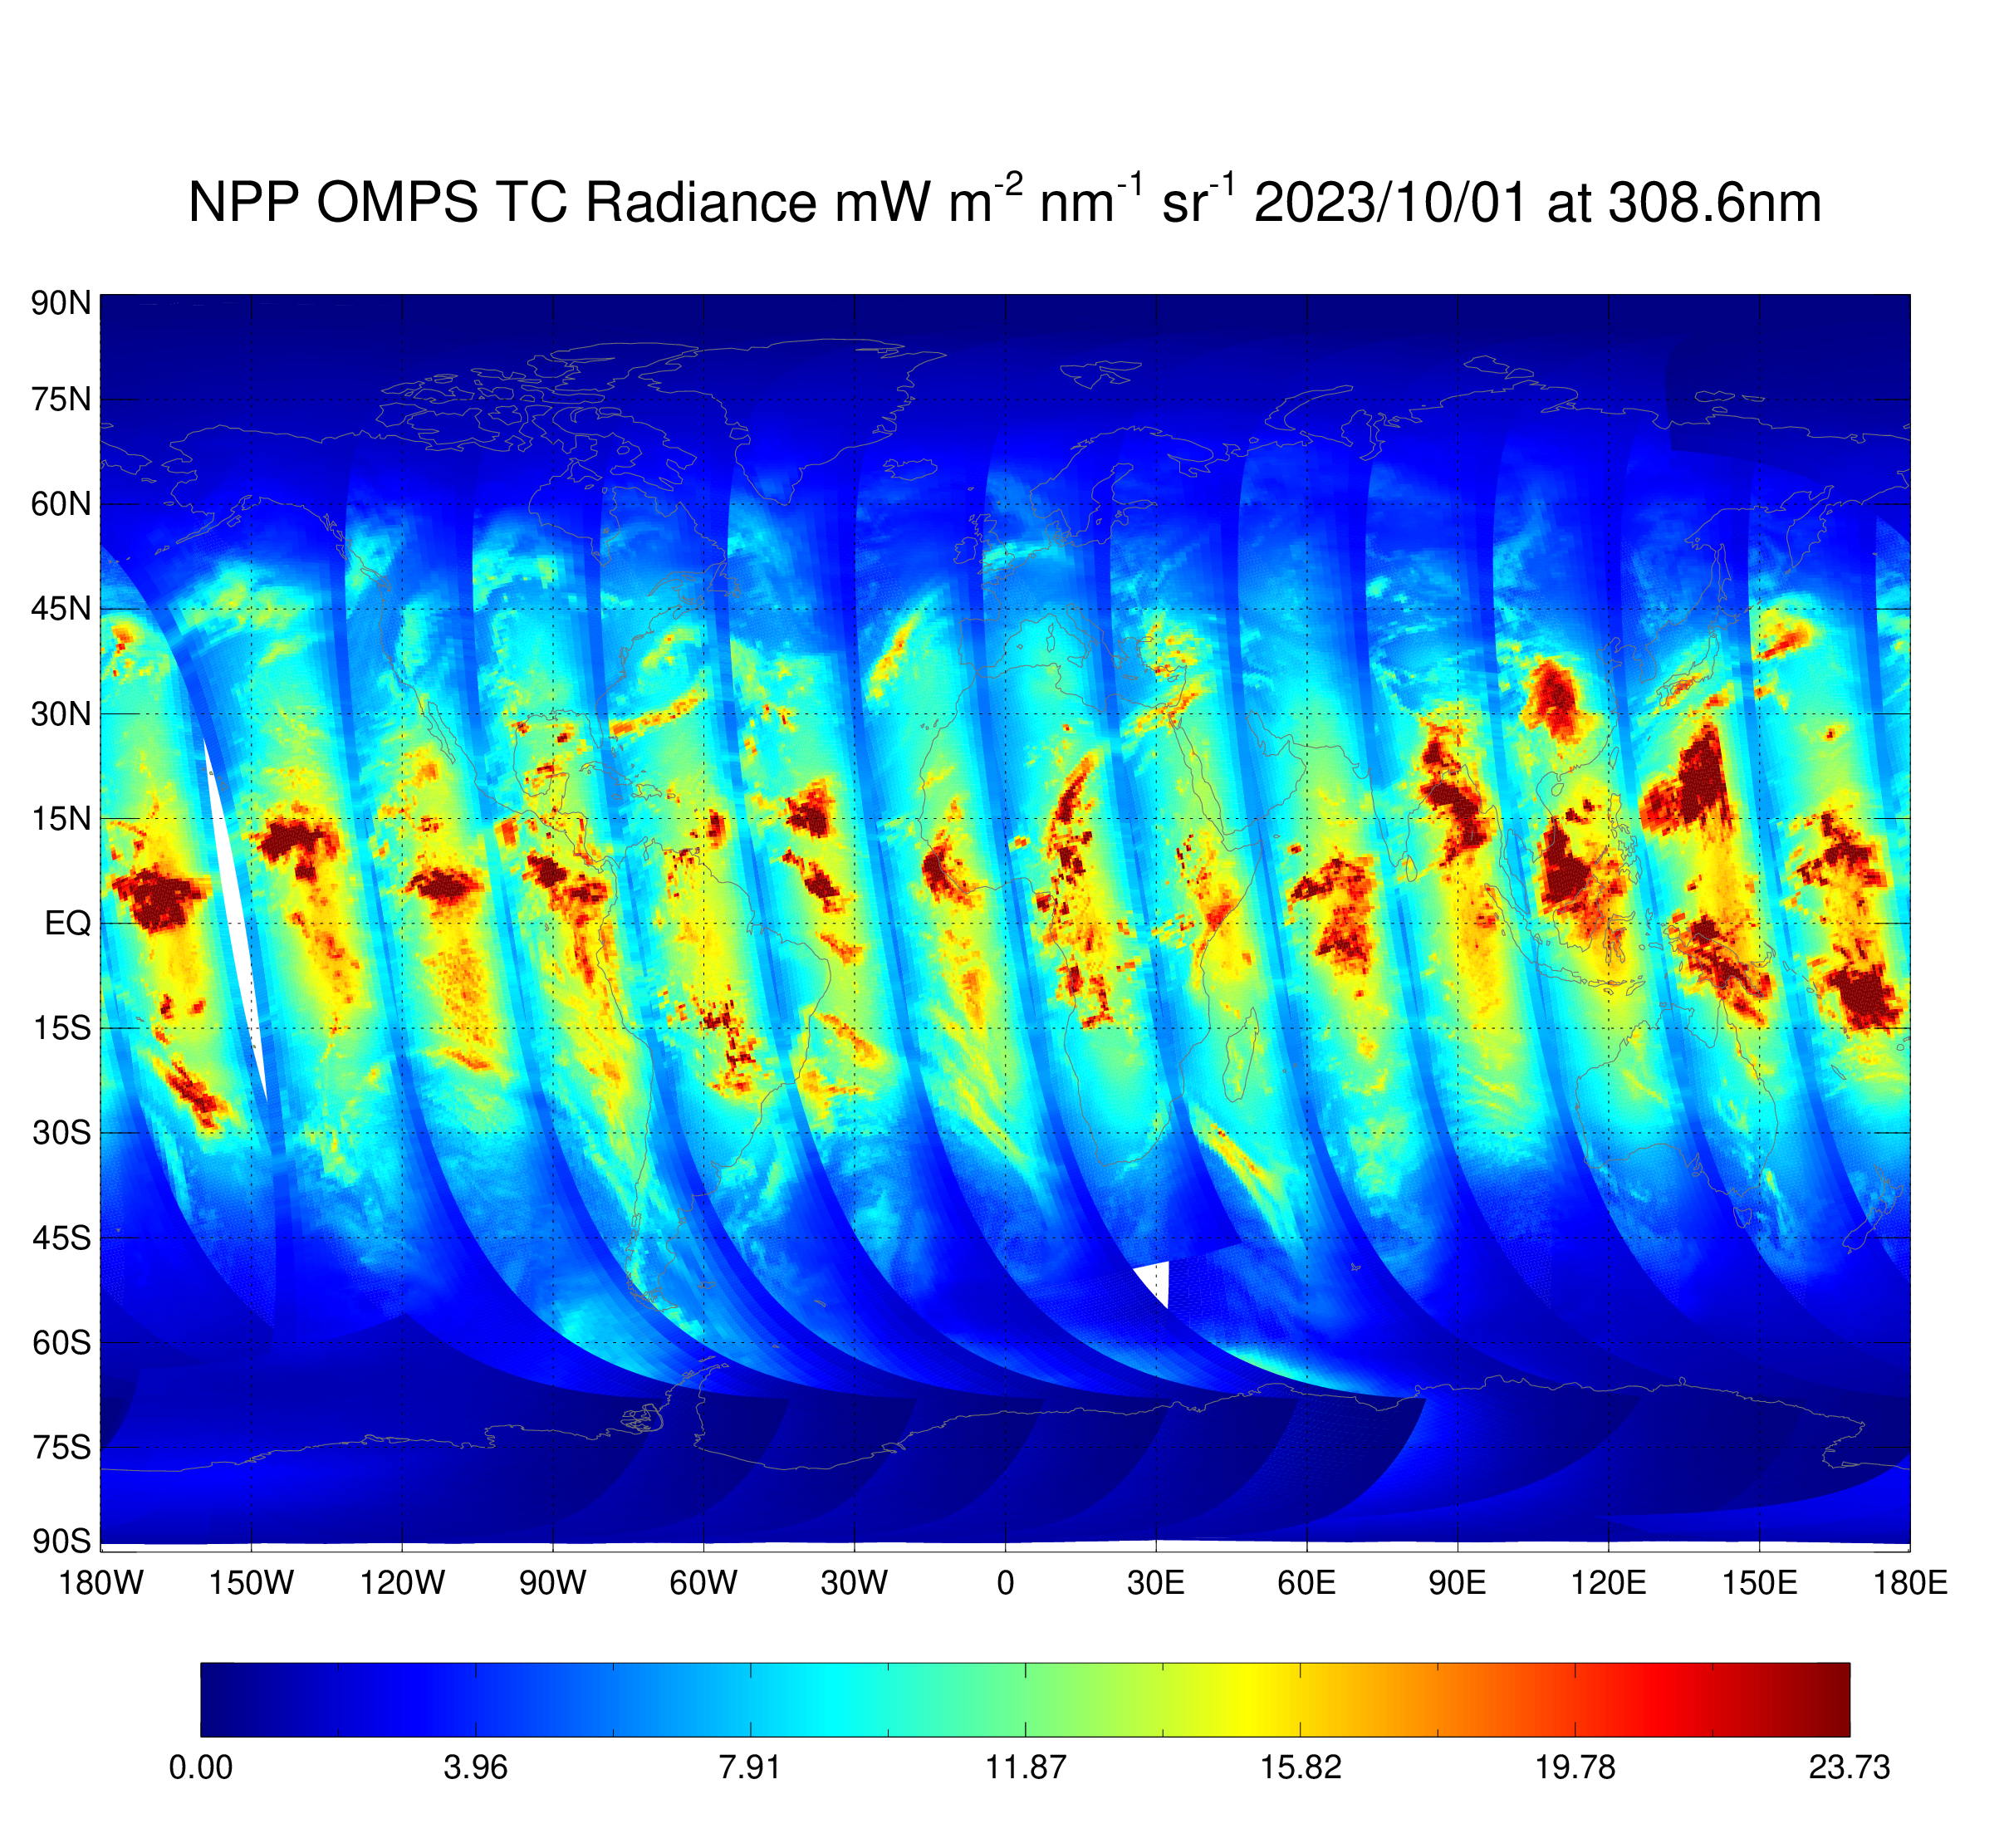 NPP OMPS NM  - NM Earth View Radiance - Radiance Map at 308.7 nm - 10/01/2023